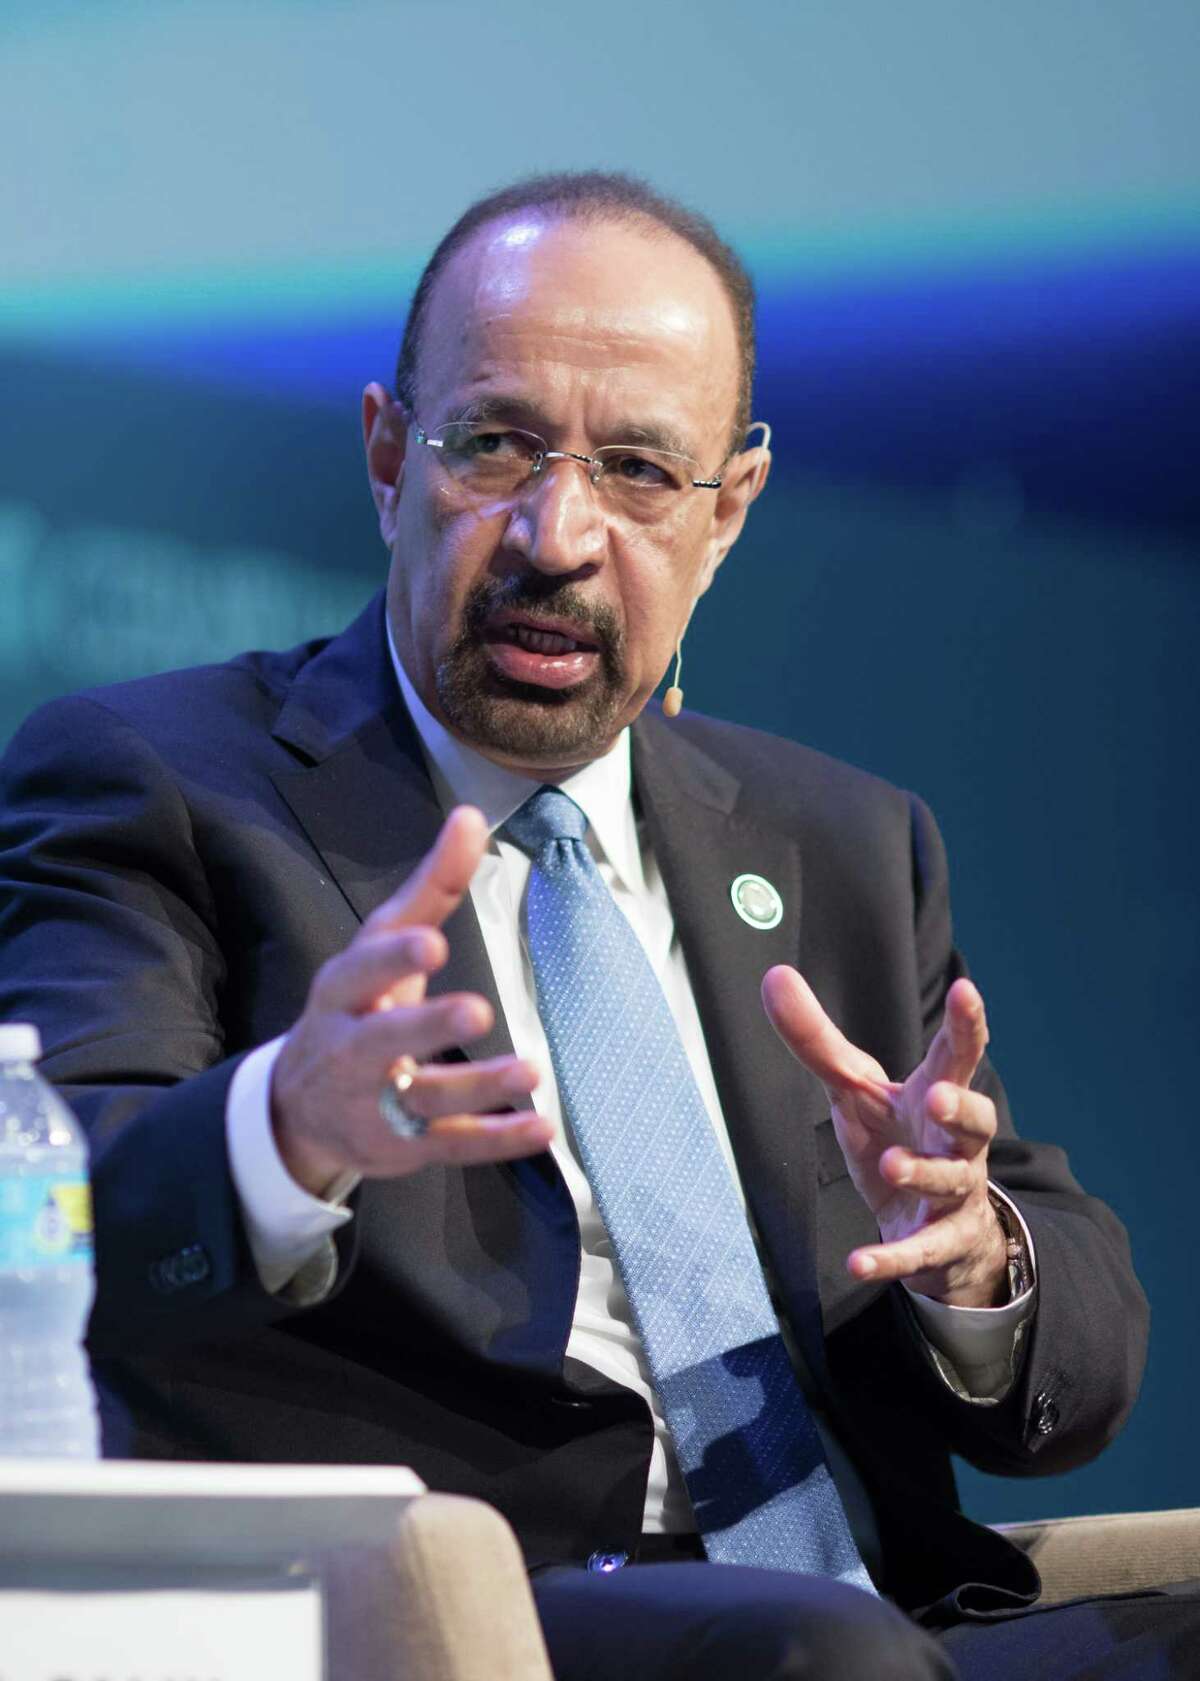 Khalid Bin Abdulaziz Al-Falih, Saudi Arabia's energy and industry minister, speaks during the 2017 IHS CERAWeek conference in Houston, Texas, U.S., on Monday, March 7, 2017. CERAWeek gathers energy industry leaders, experts, government officials and policymakers, leaders from the technology, financial, and industrial communities to provide new insights and critically-important dialogue on energy markets. Photographer: F. Carter Smith/Bloomberg